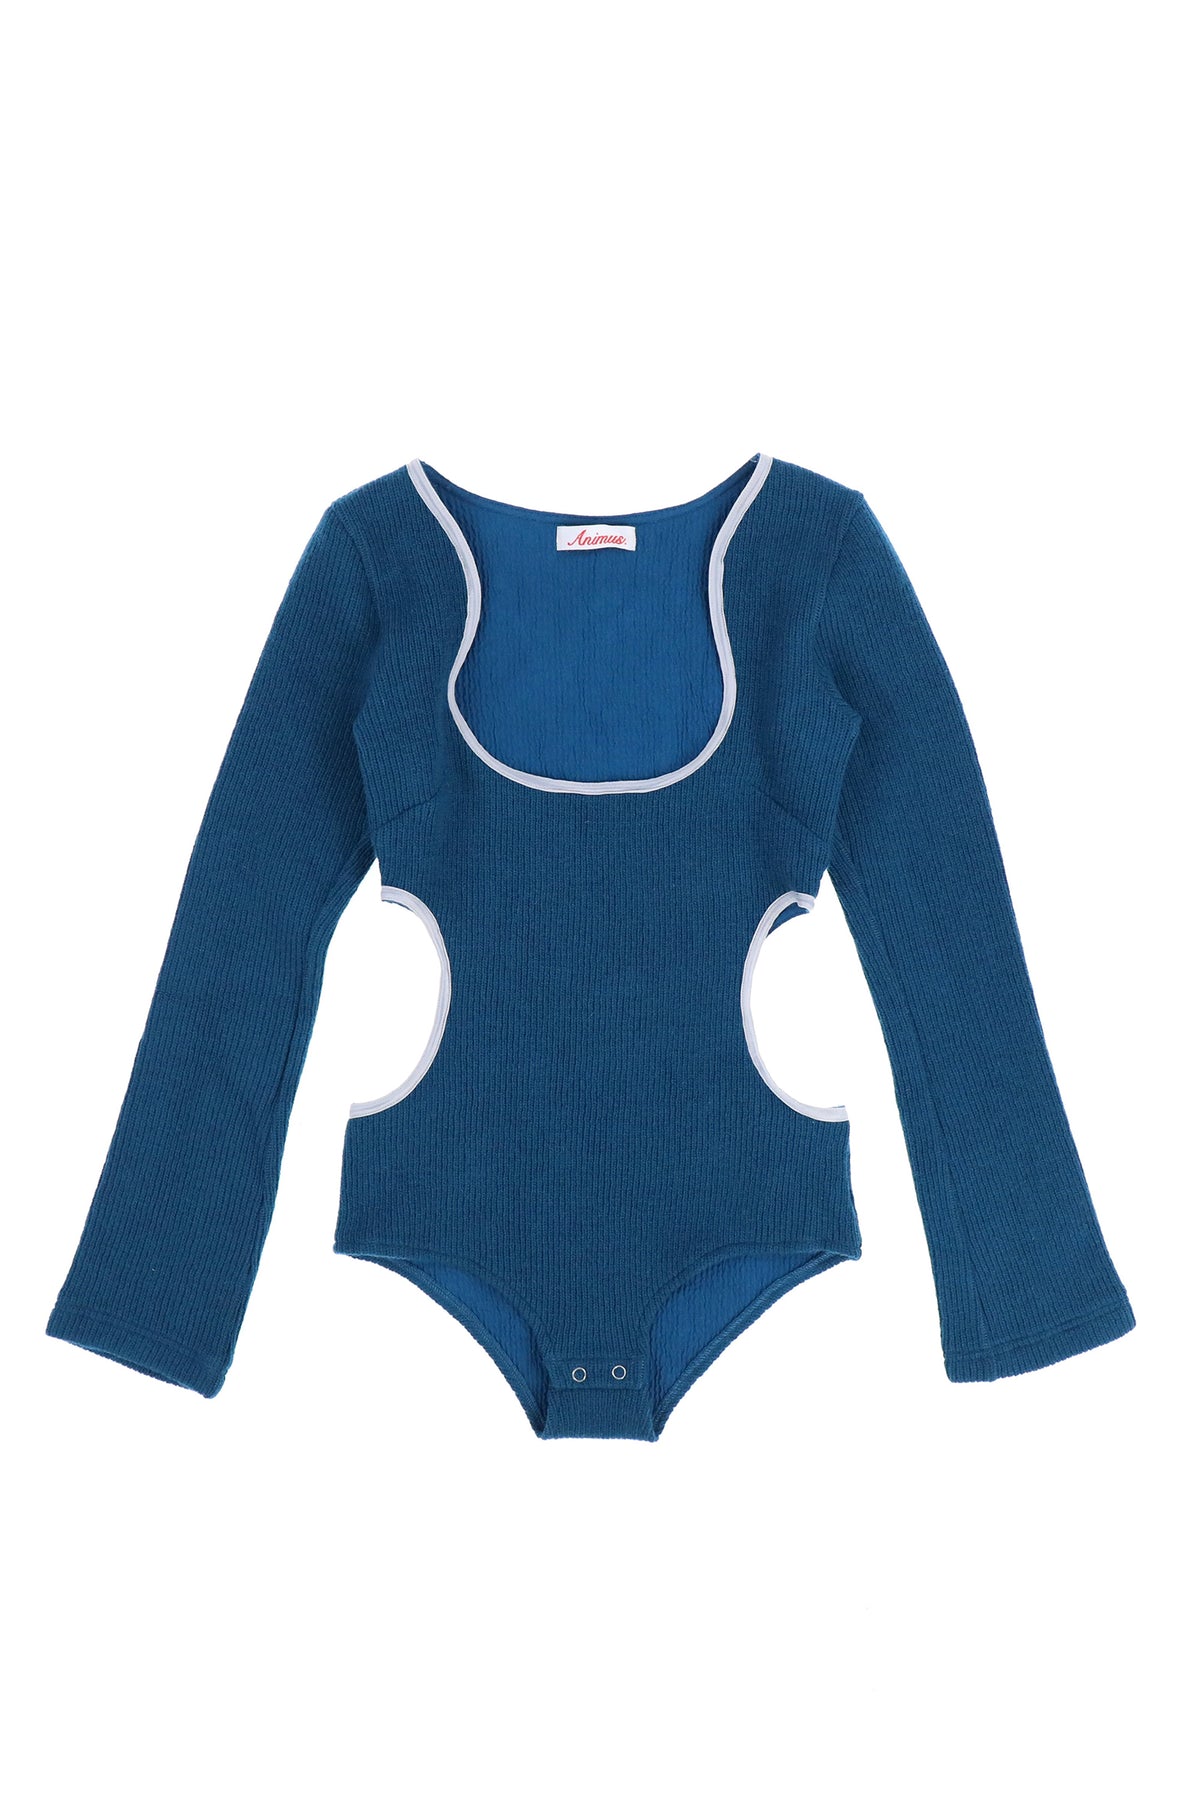 BODY SUITE BY KNITTING / L BLU